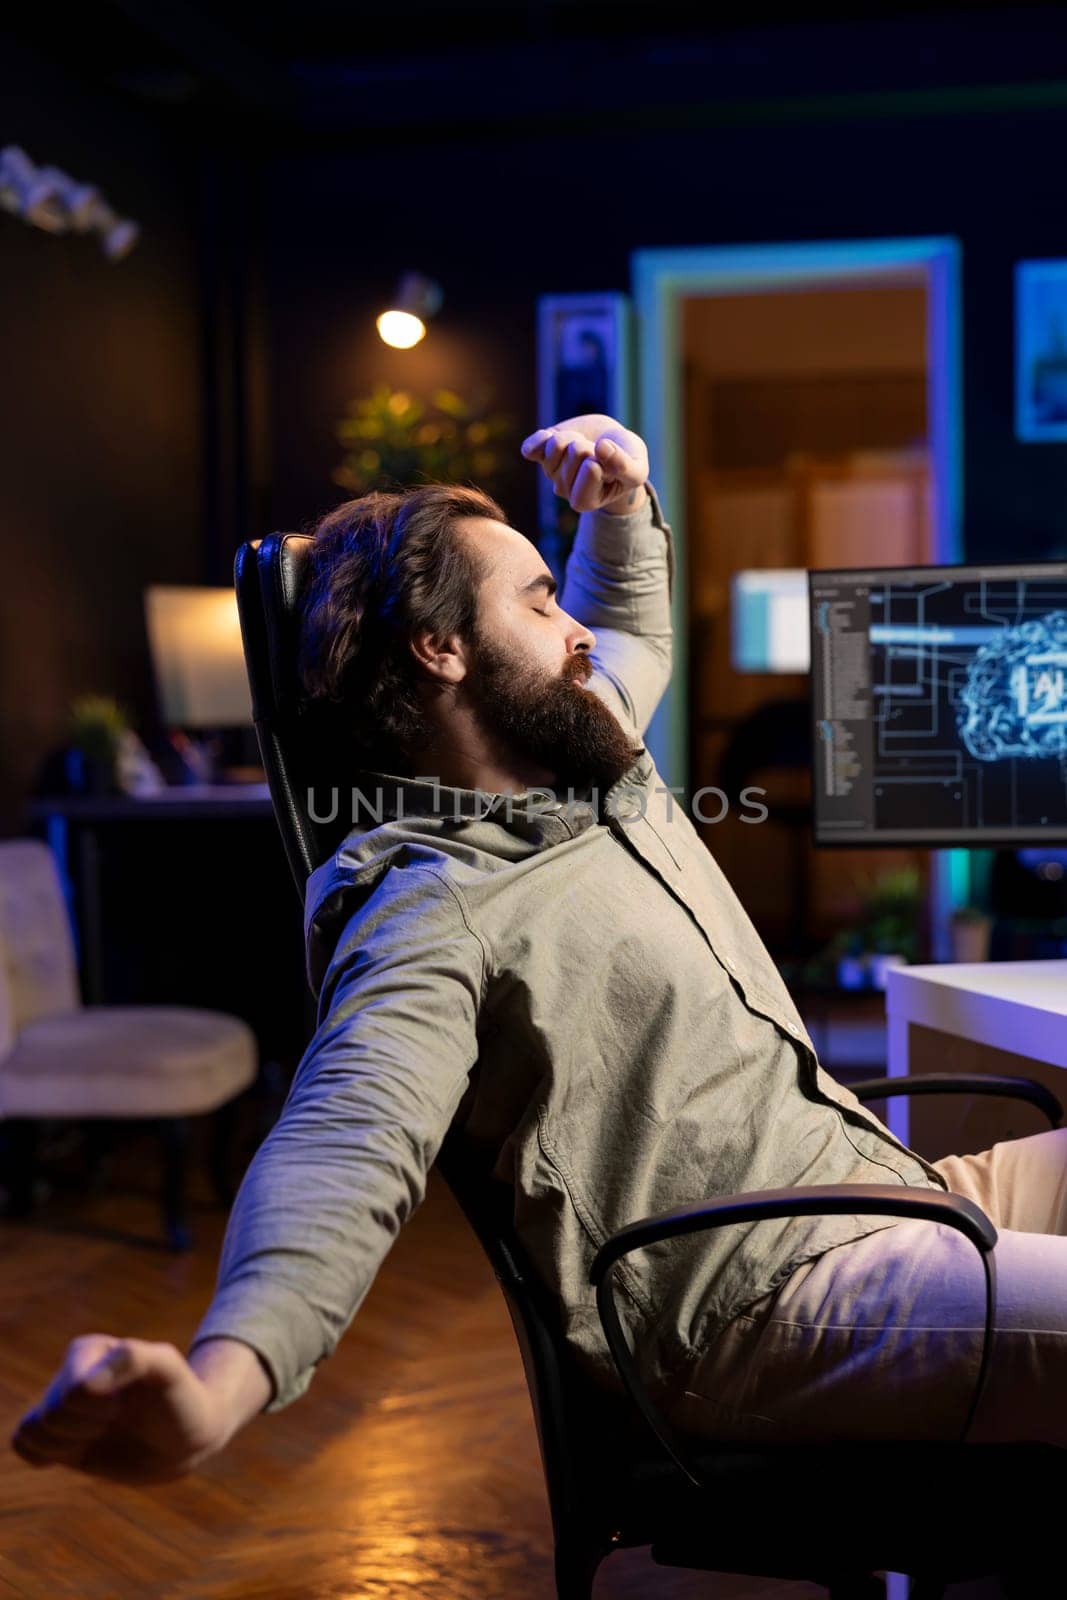 AI software technician stretching after using computer all day by DCStudio